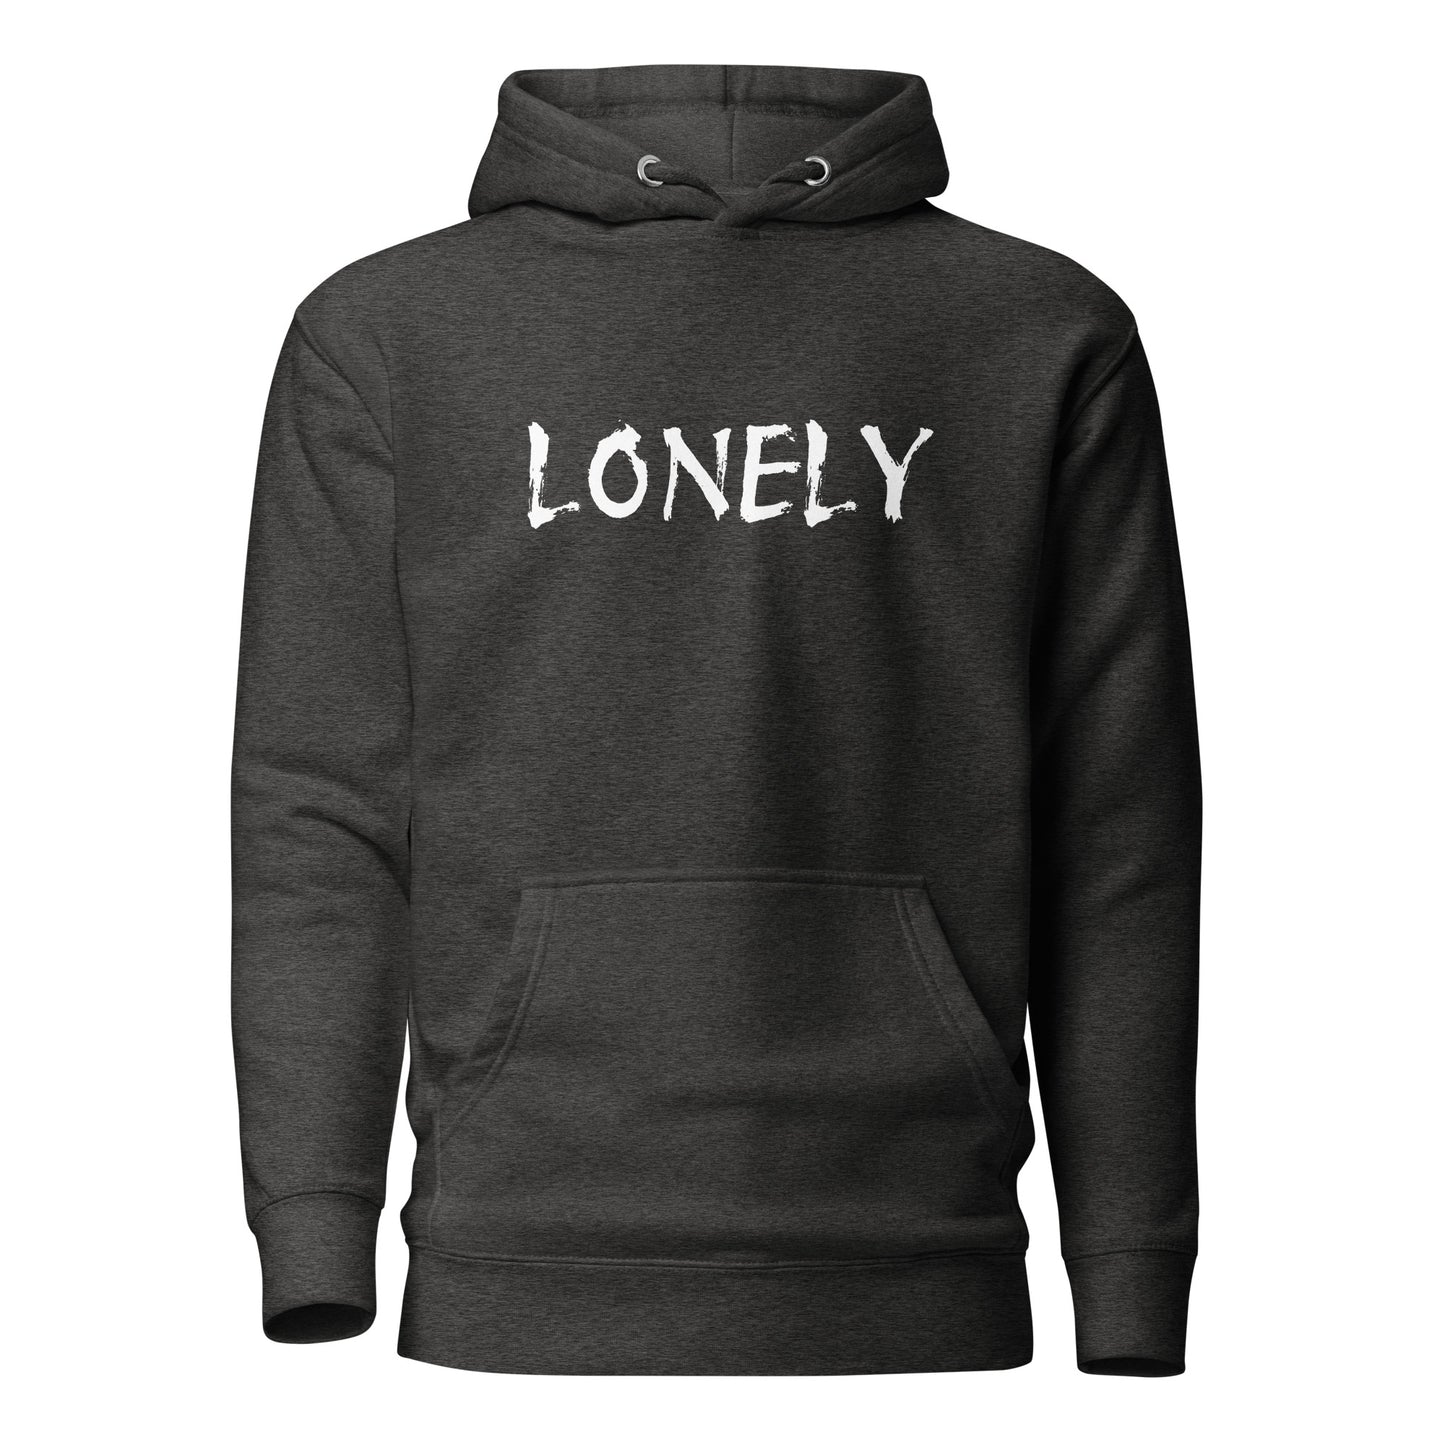 "LONELY" Hoodie